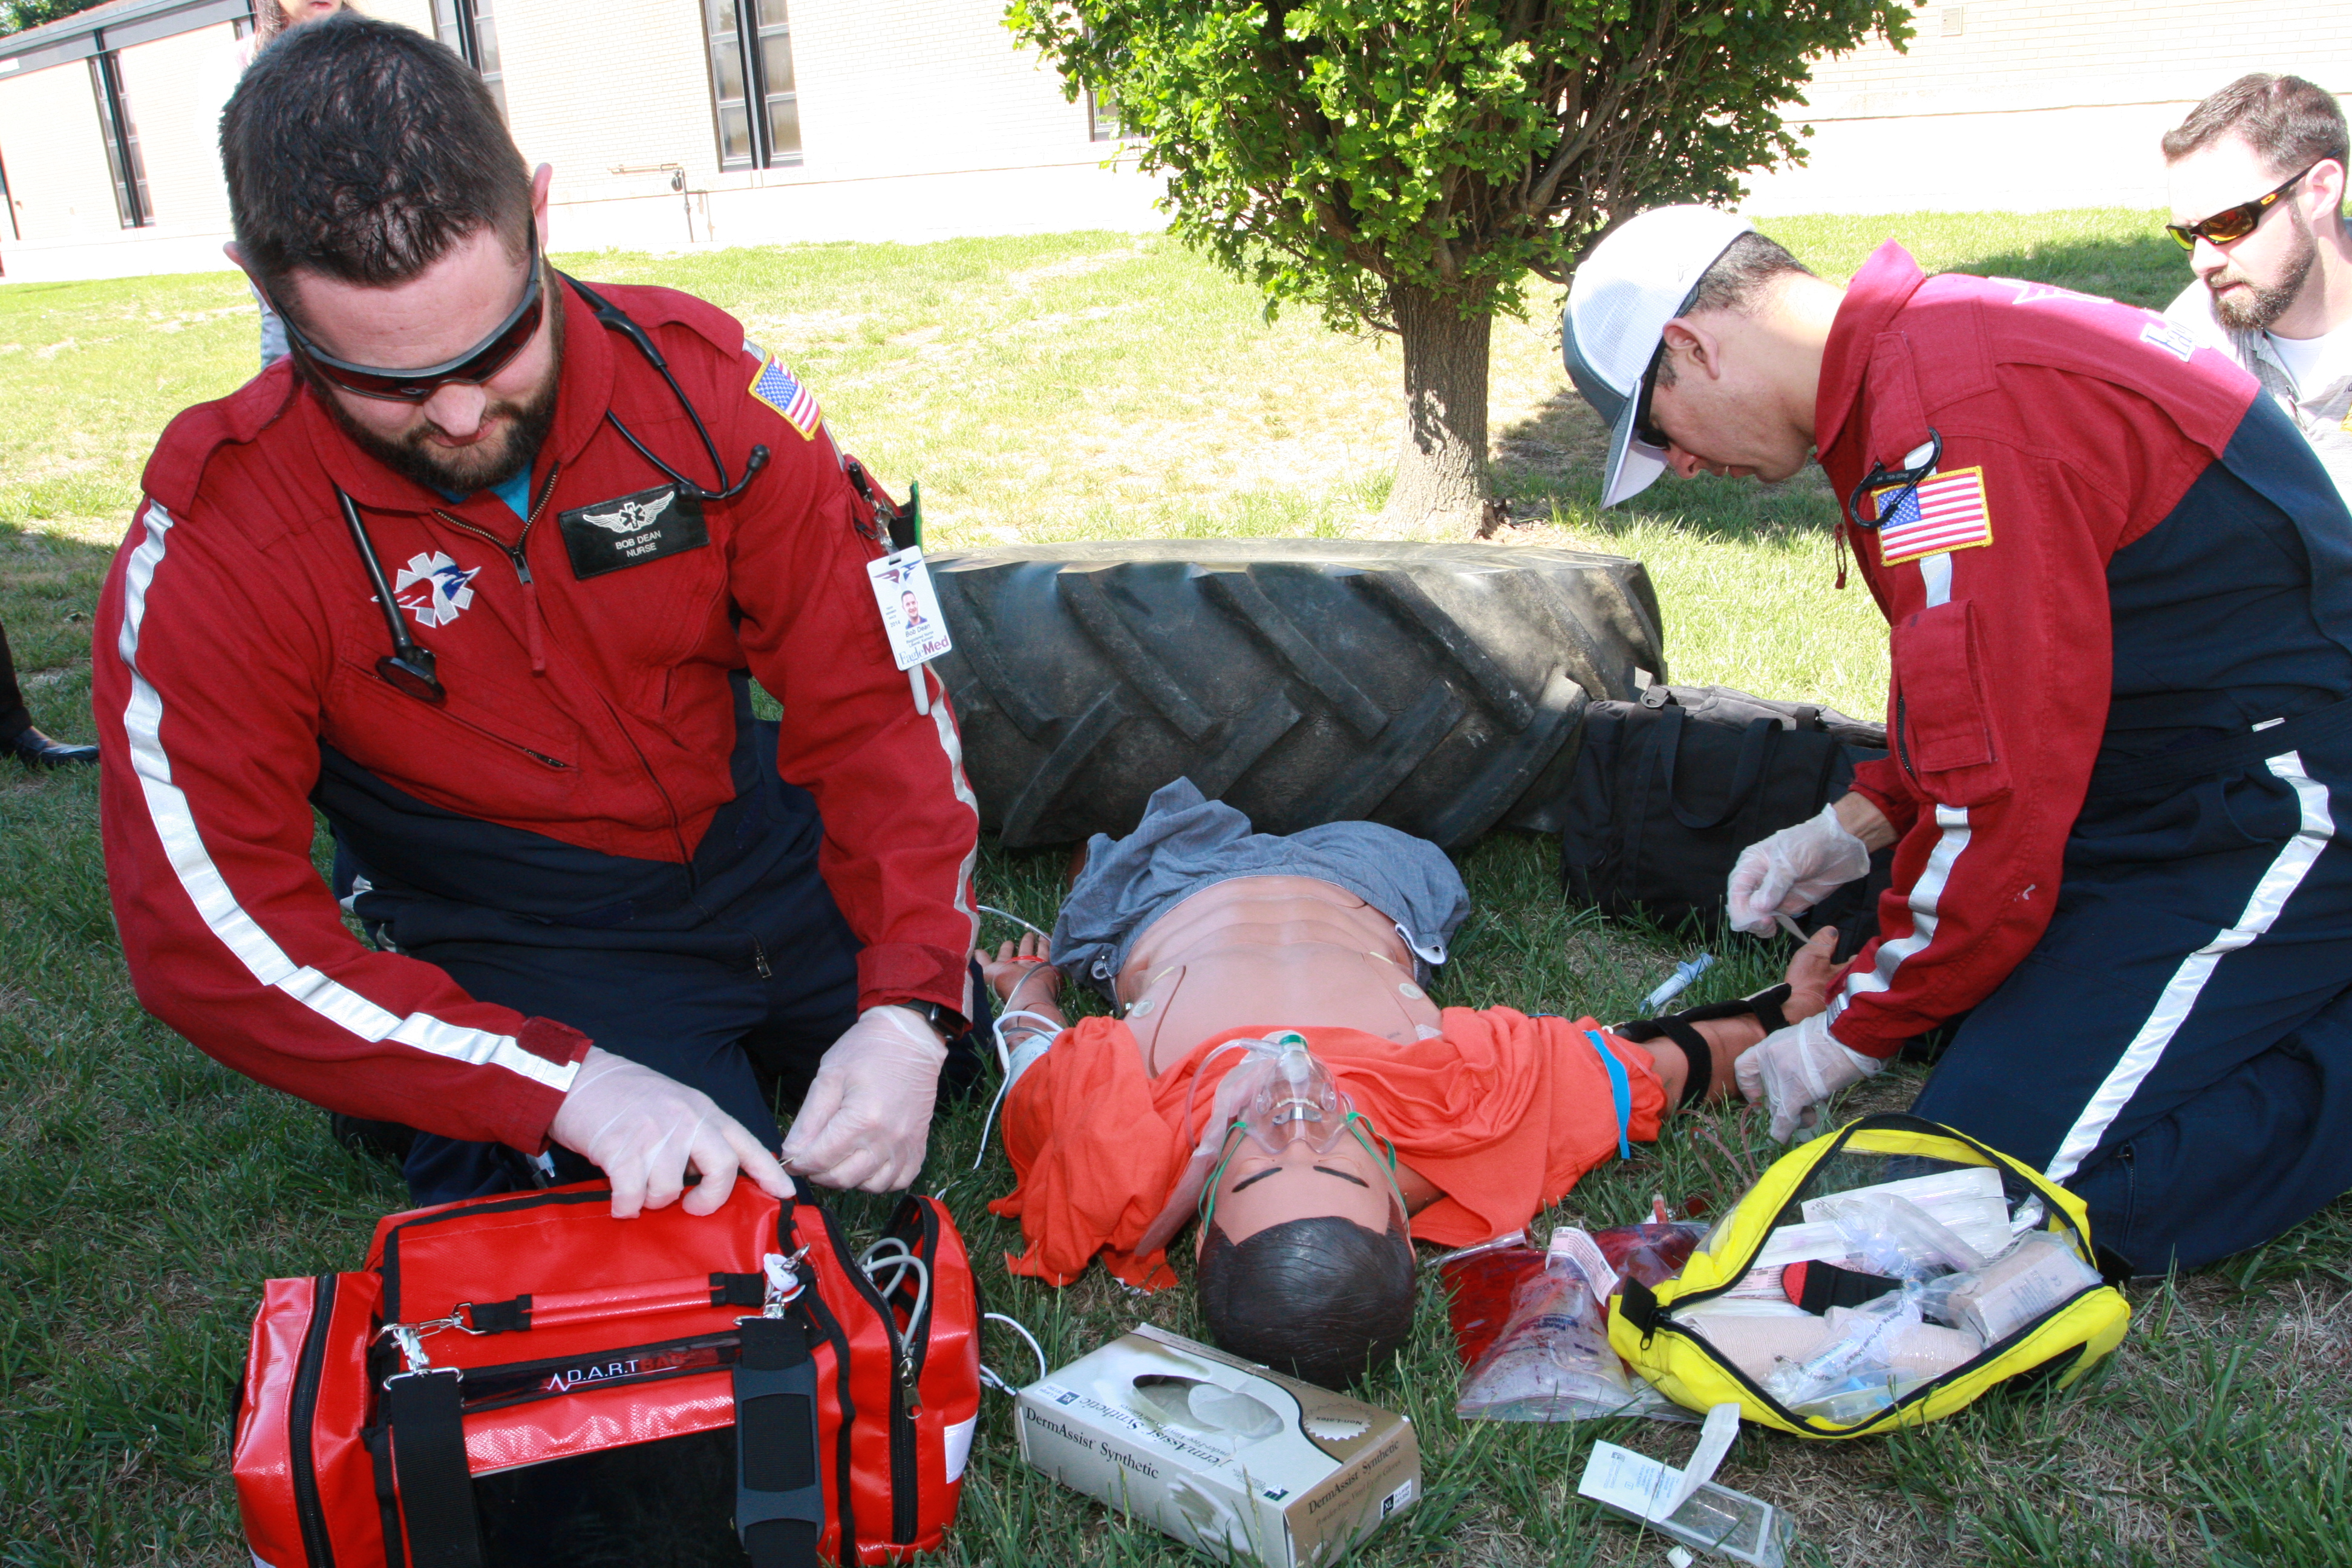 EagleMed personnel stabilize pinned advanced medical simulation mannequin during training scenario